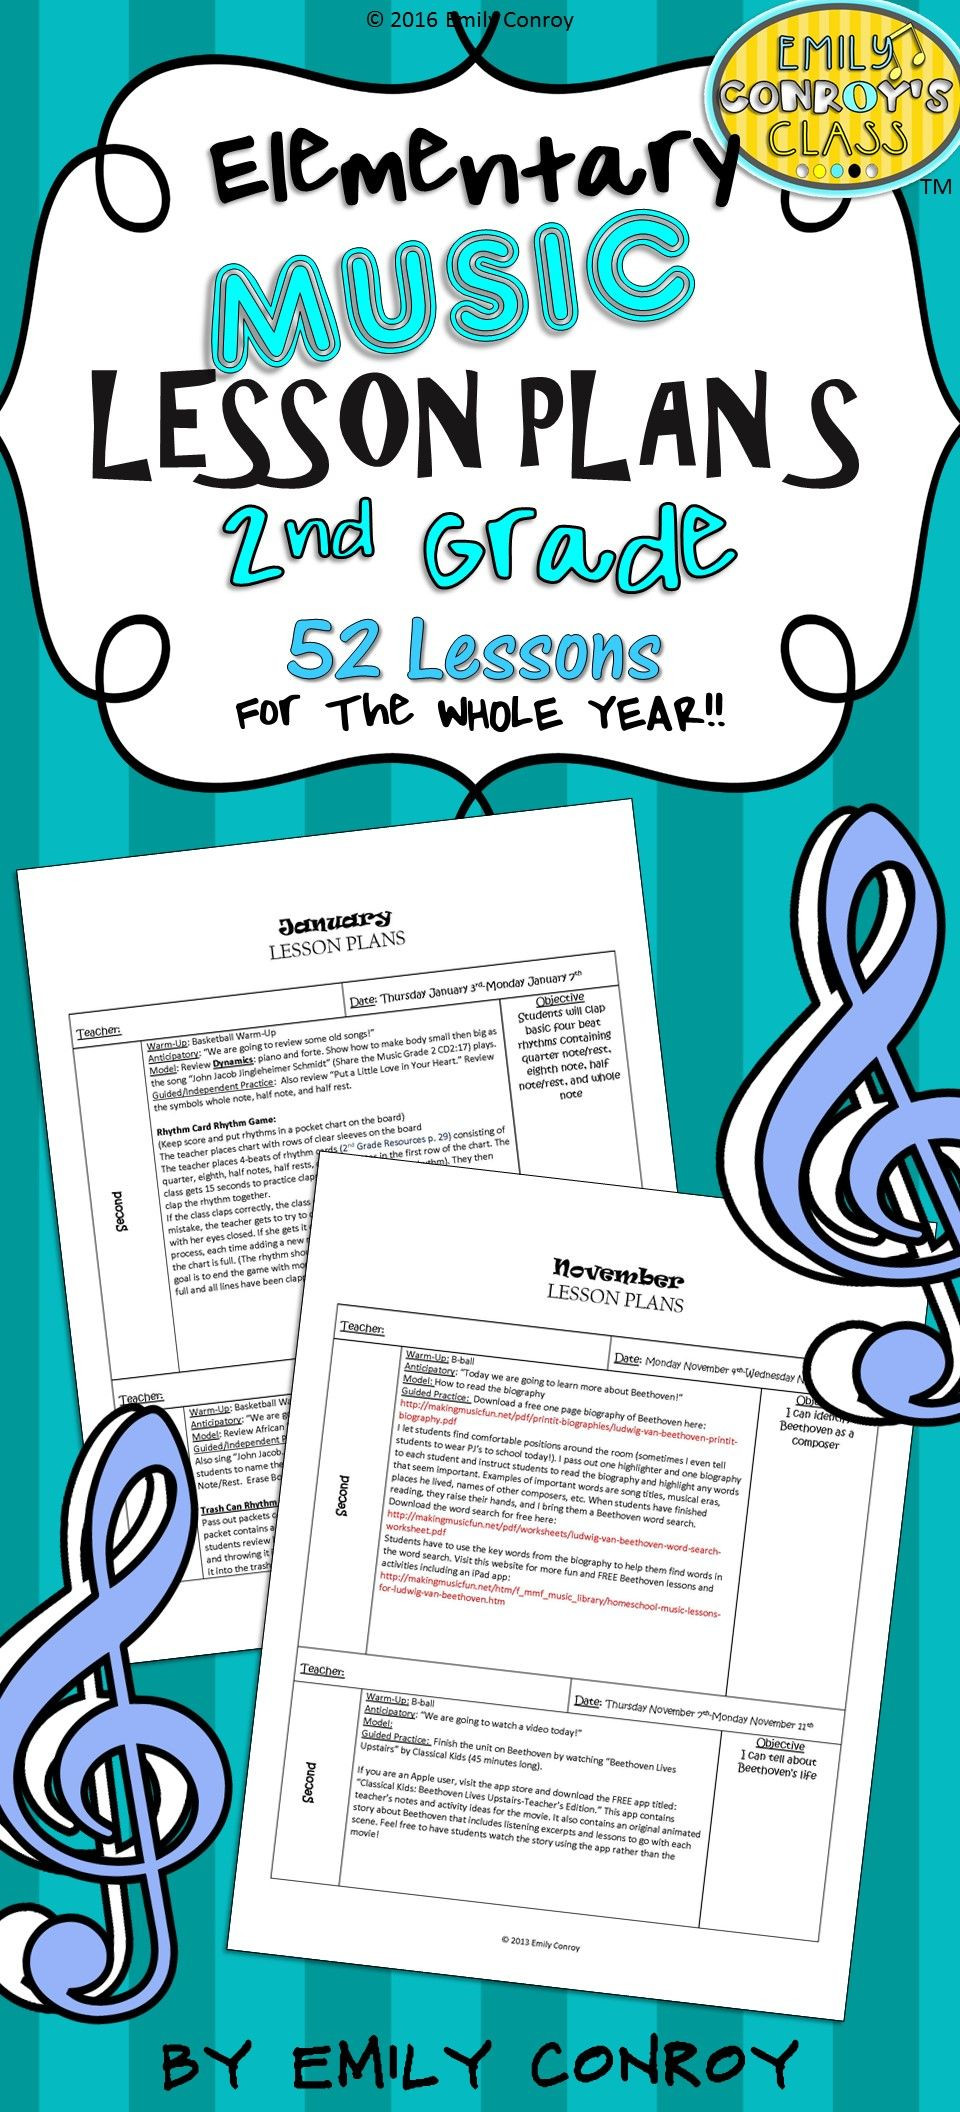 Music Lesson Plans for Preschool Second Grade Music Lessons Plans these Plans are Creative